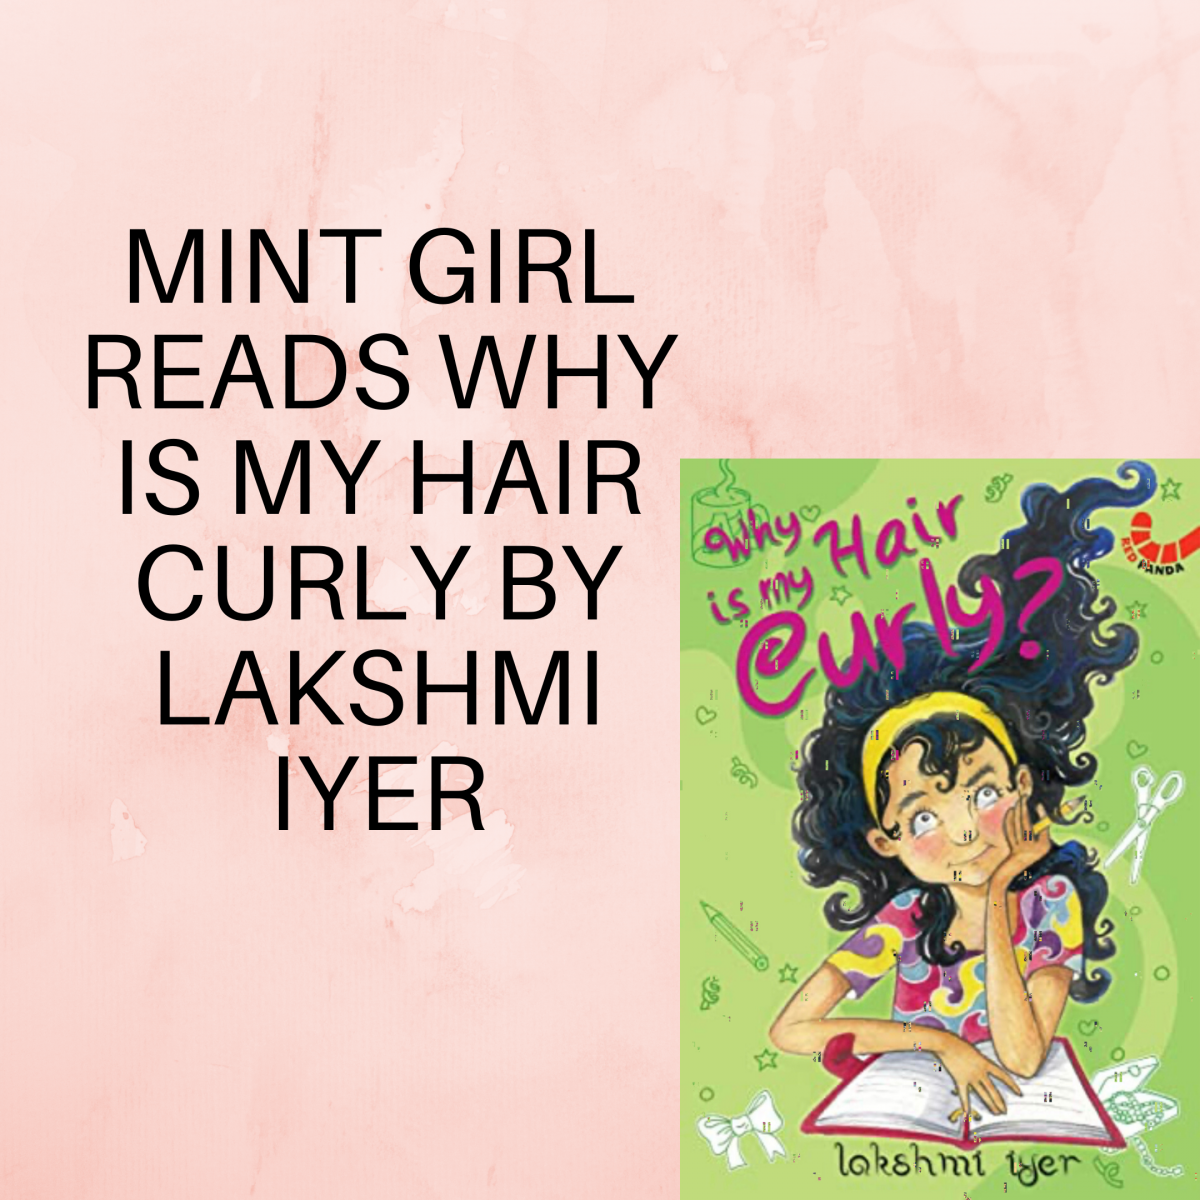 Mint Girl Reads Why is my Hair Curly? by Lakshmi Iyer